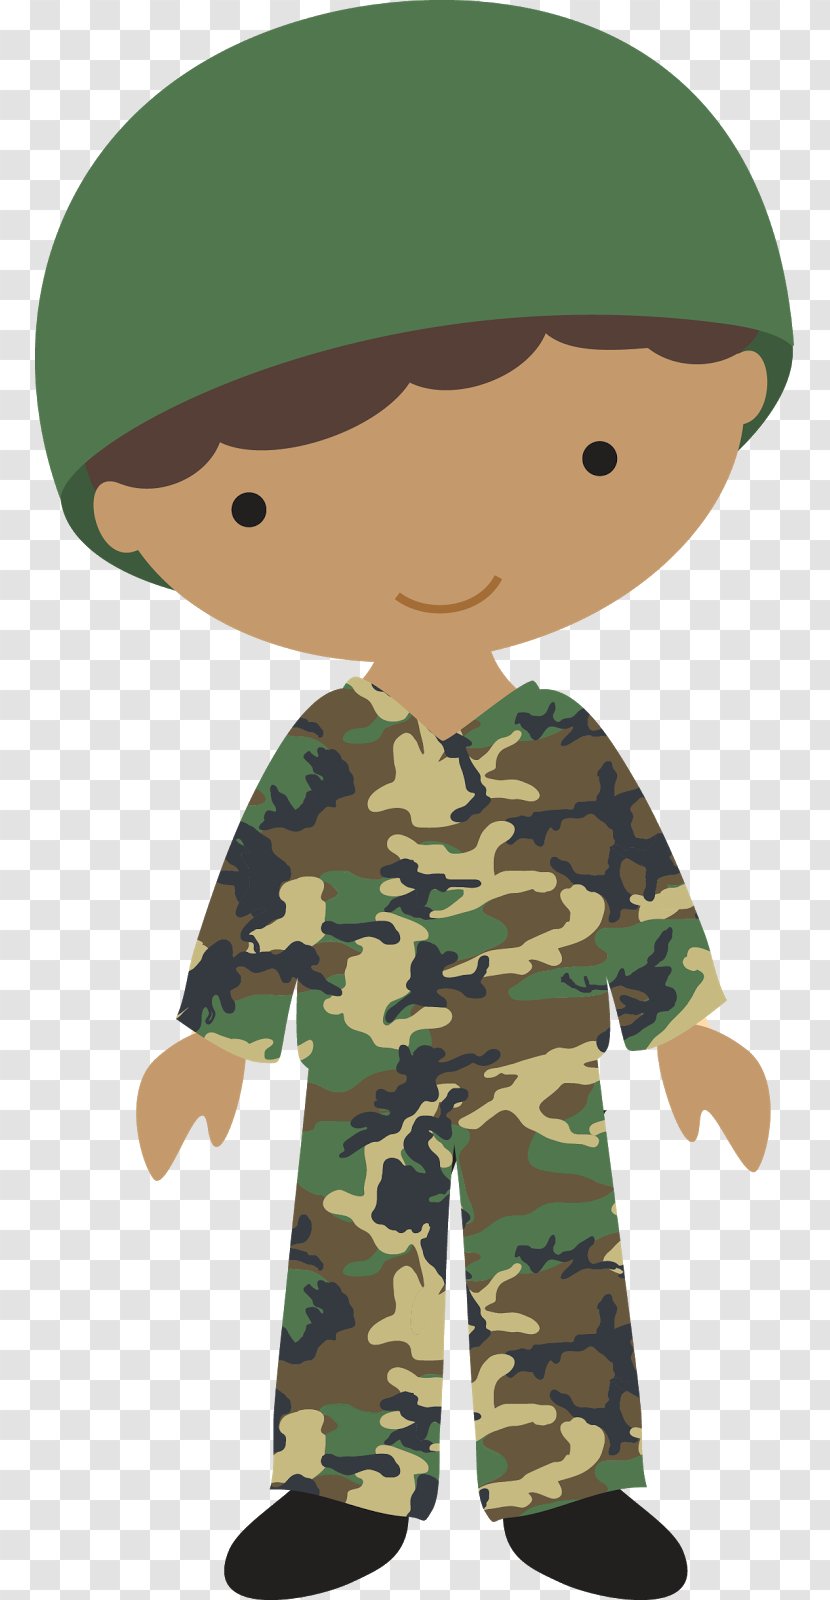 Soldier Costume Clip Art - Boy - Military Toys Cliparts Transparent PNG